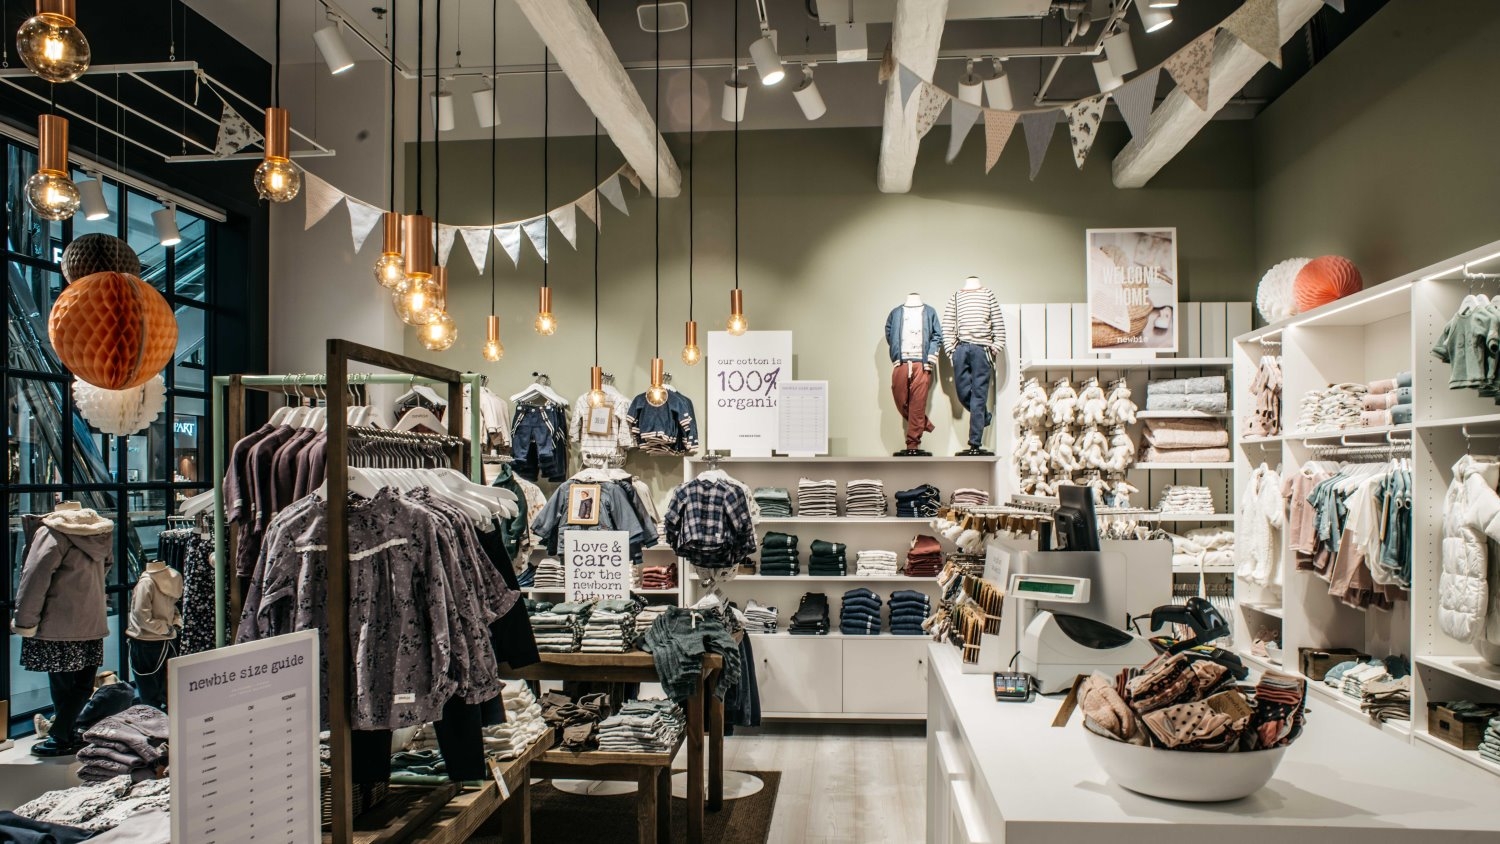 New retail brands enter the Polish market in 2017